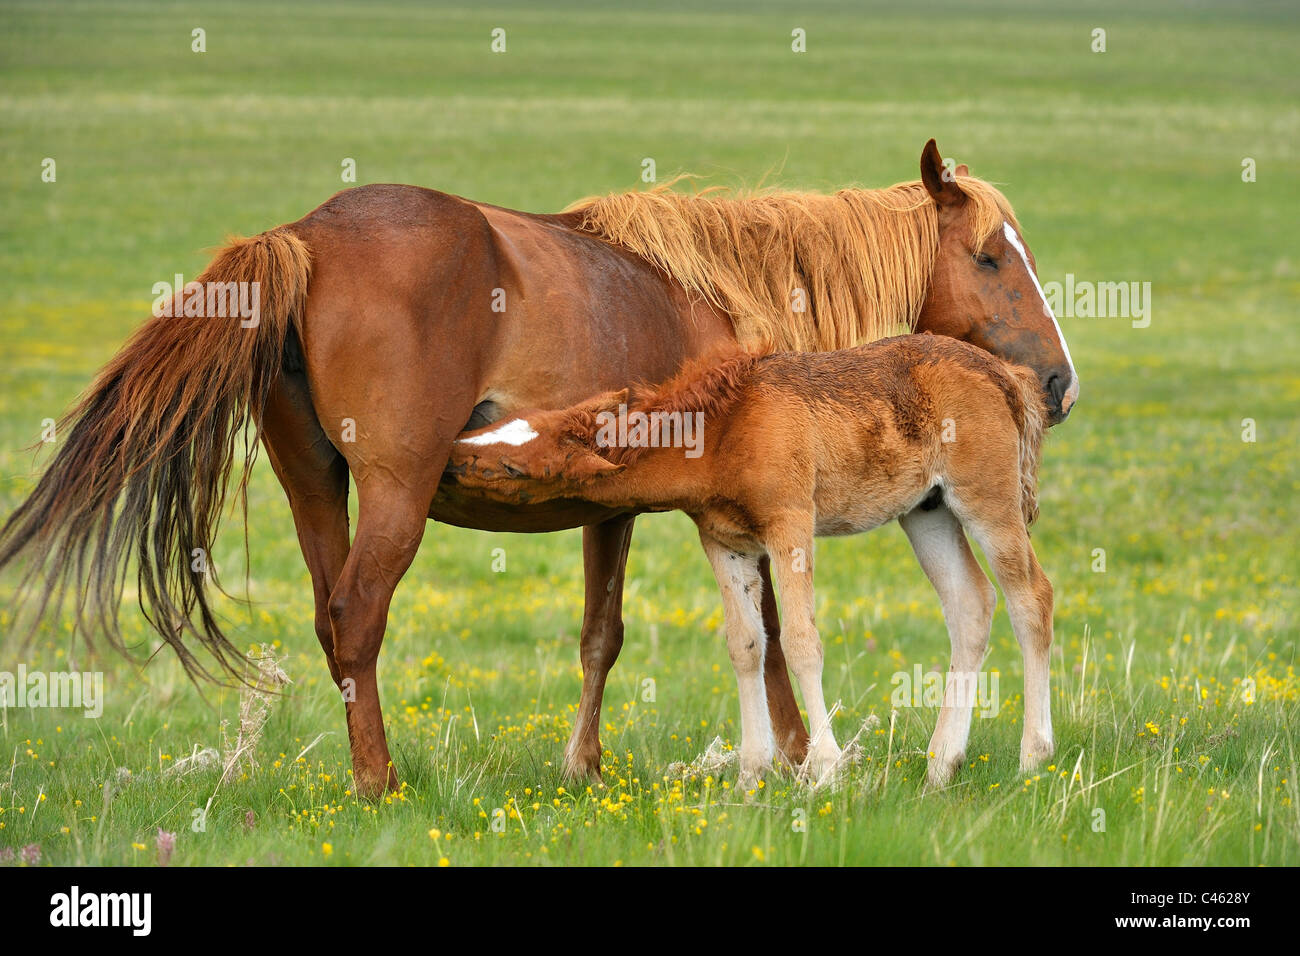 A Mare with a foal. Stock Photo